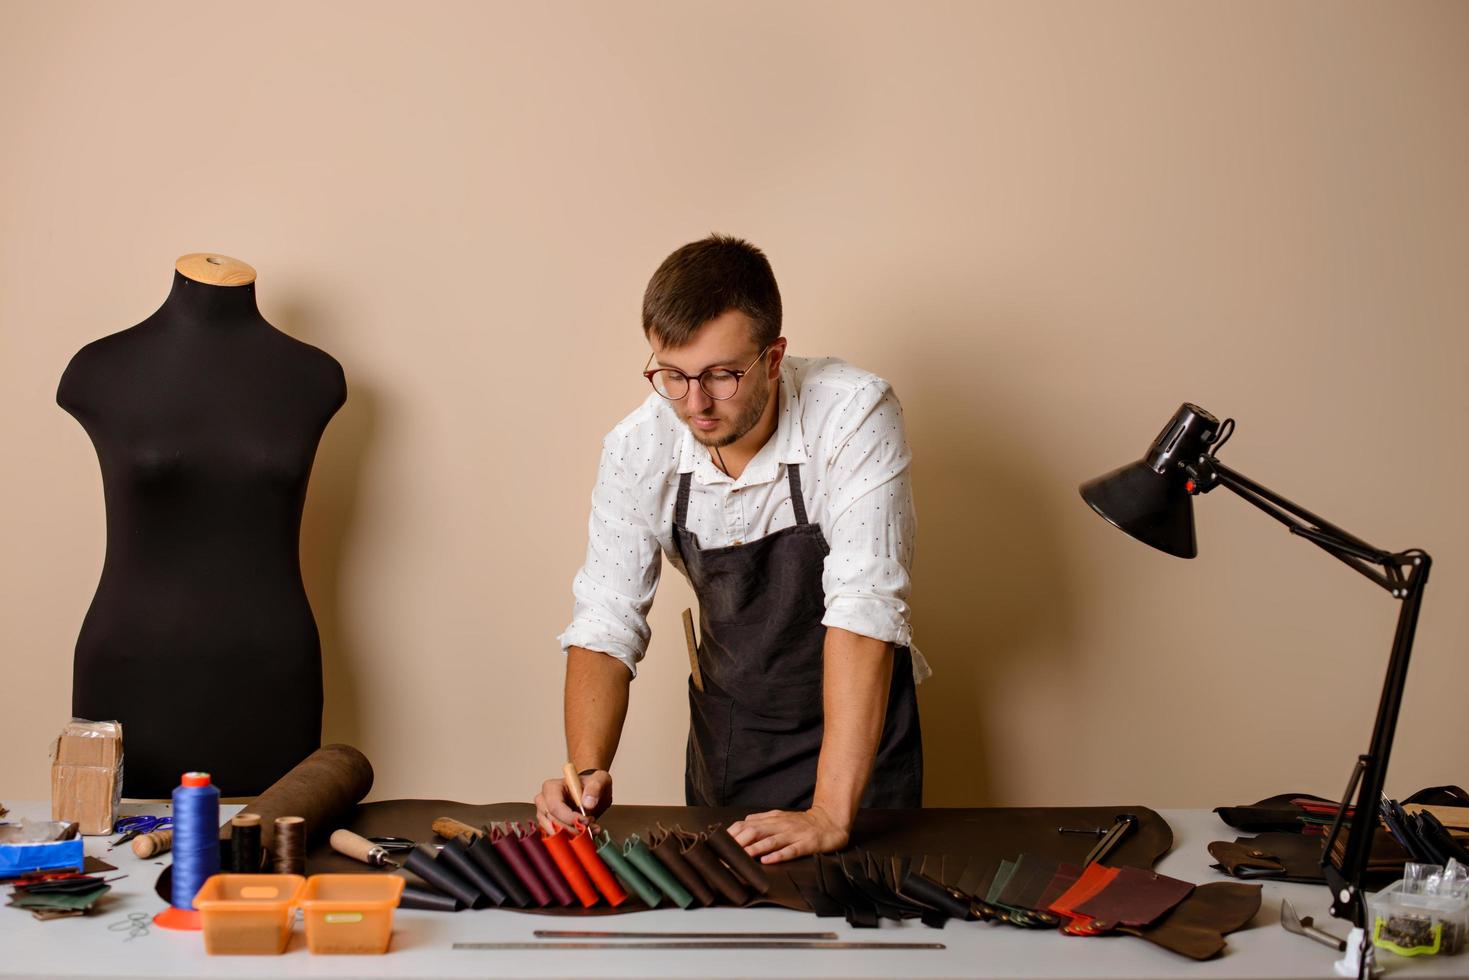 Workshop for leather products photo